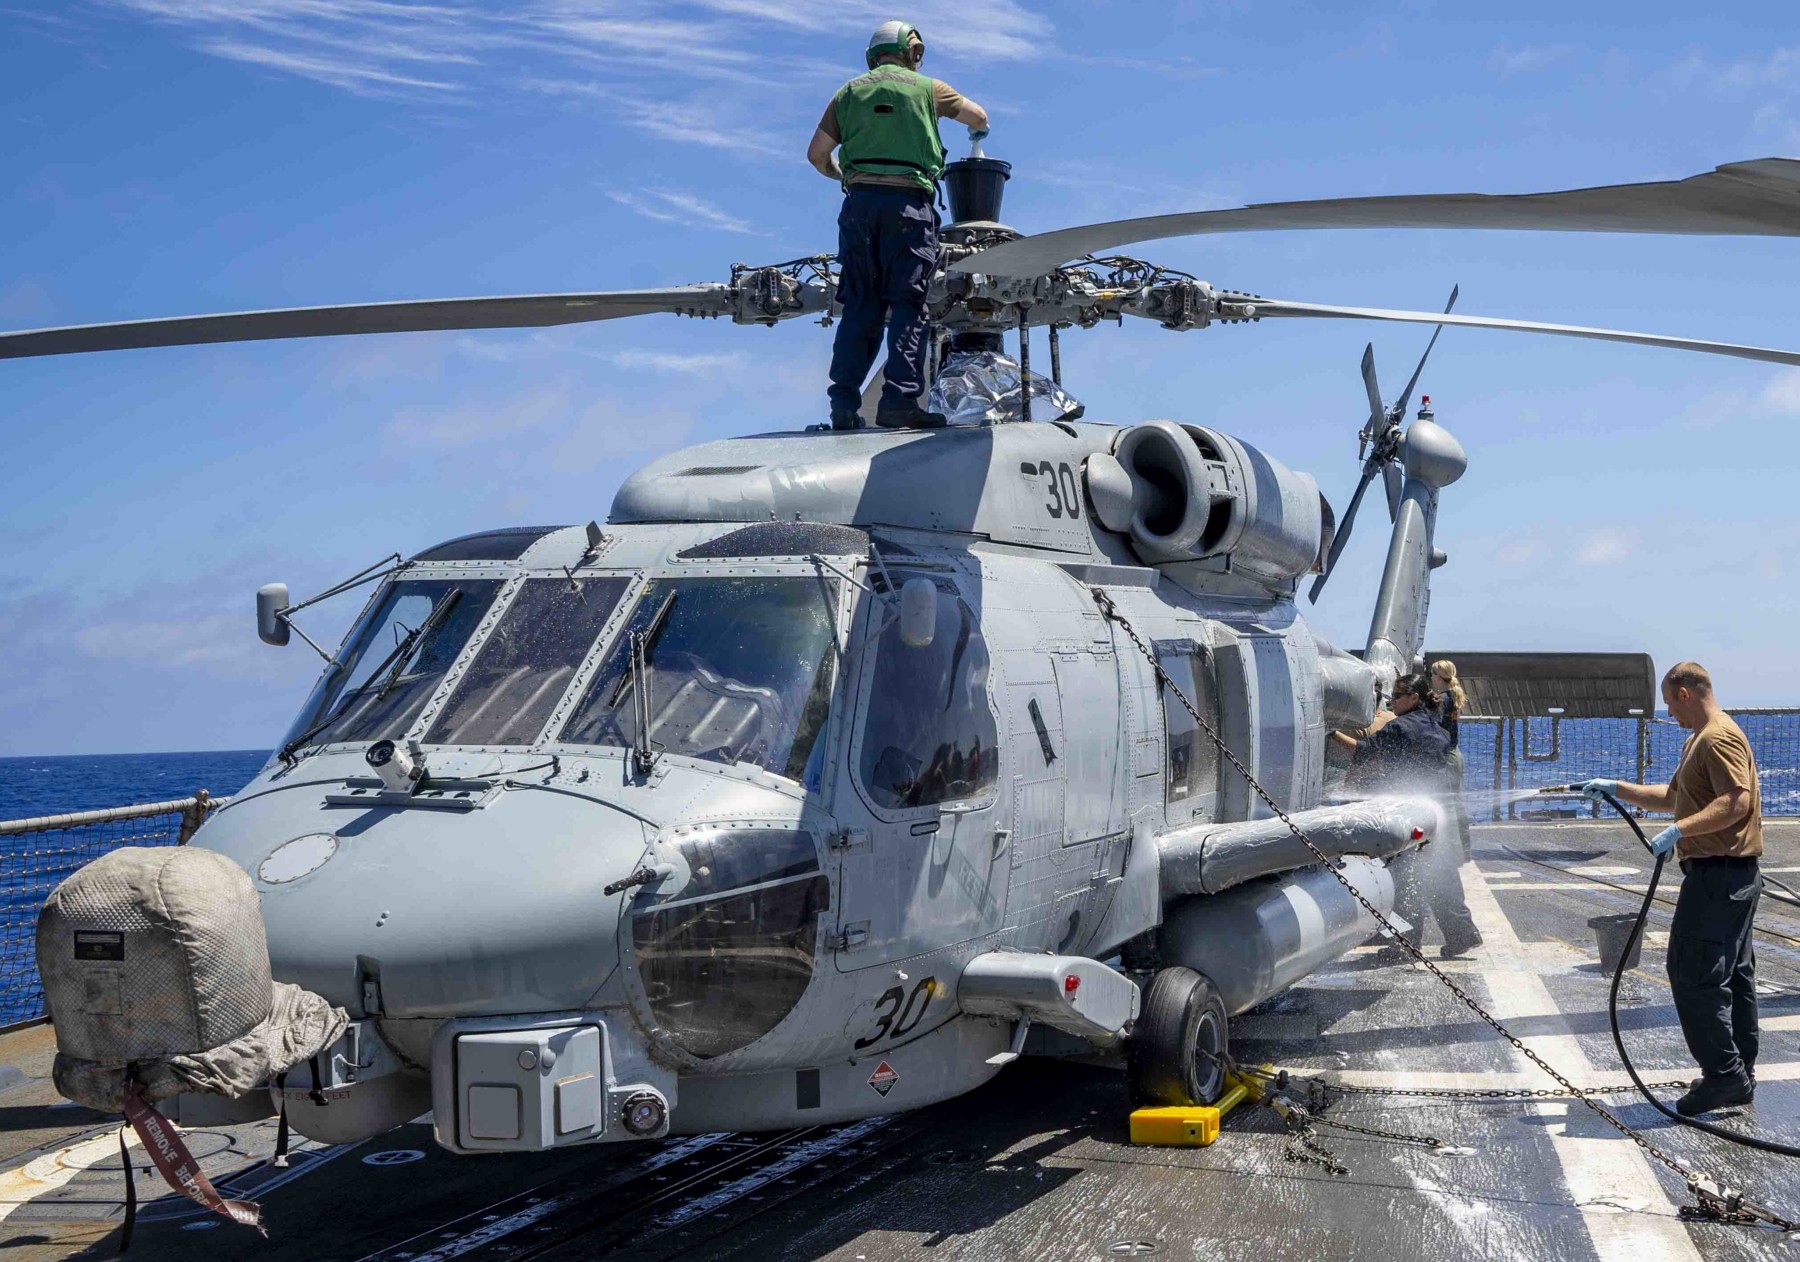 hsm-35 magicians helicopter maritime strike squadron us navy mh-60r seahawk 43